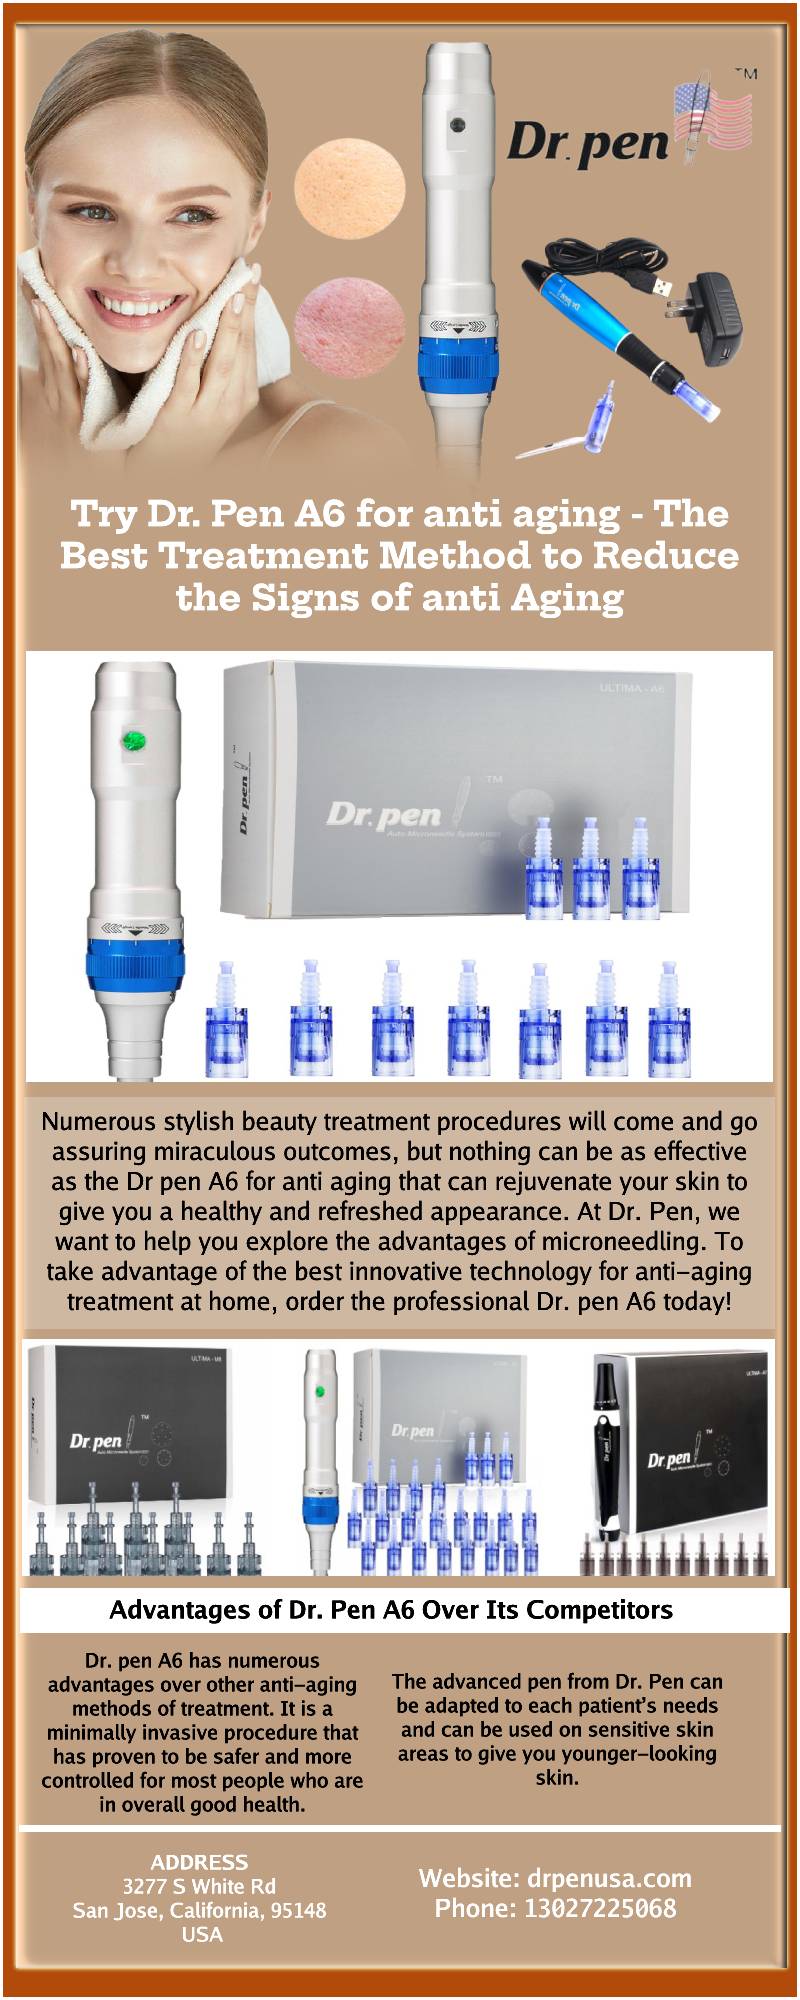 Try Dr. pen A6 for anti aging - The best treatment method to reduce the signs of anti aging.jpg  by Drpenusa